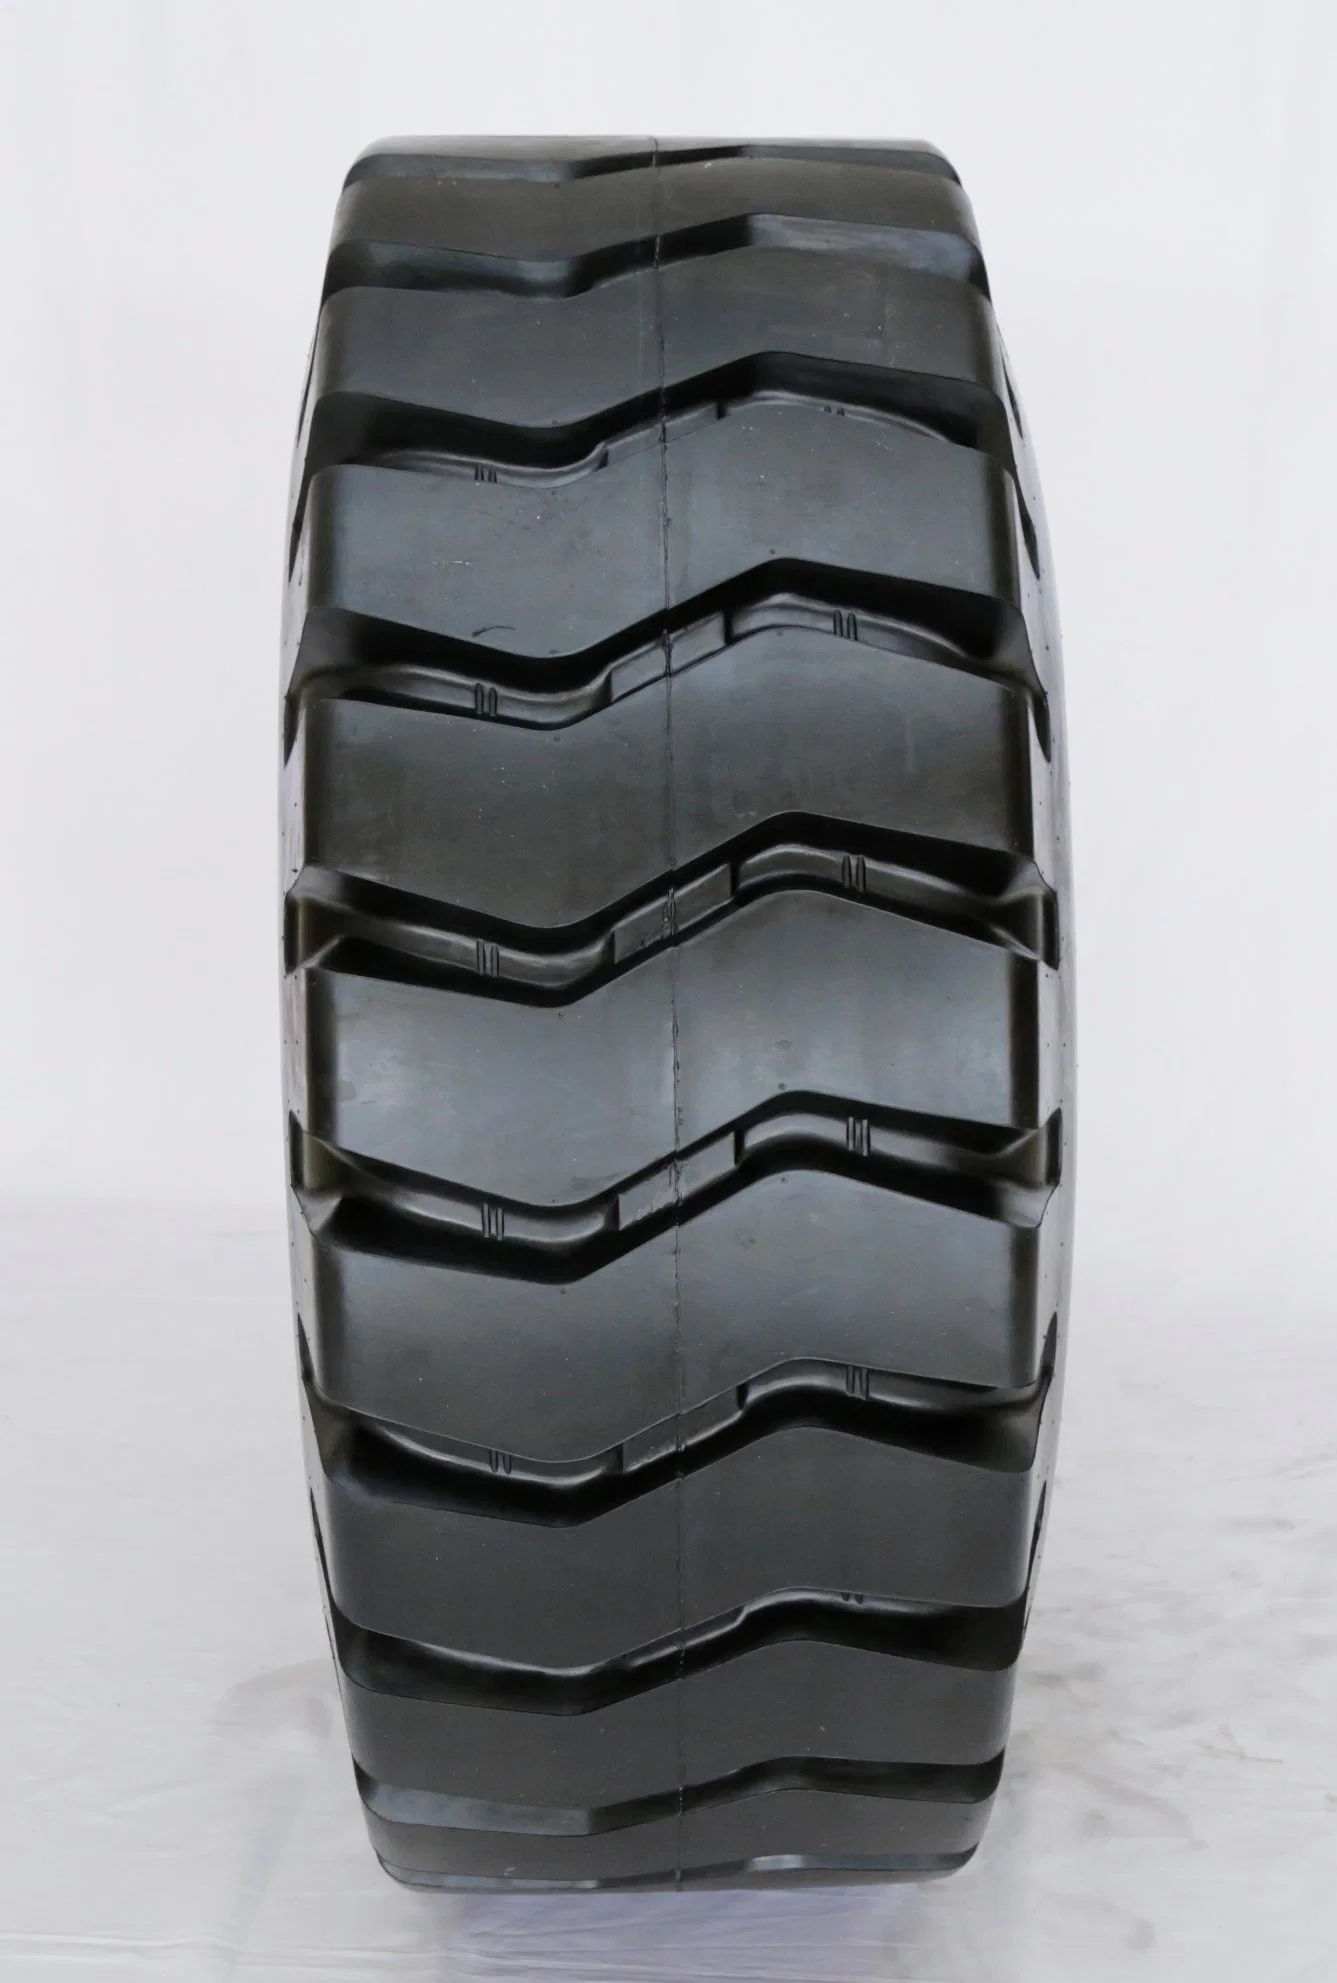 E-3/L-3 Pattern with Size 14.00-24 High quality/High cost performance OTR, Loader Tyre,26.5-25,23.5-25,20.5-25,17.5-25,16.00-24,15.5-25,7.50-16, Agricultural Tire,12.4-28,13.6-24